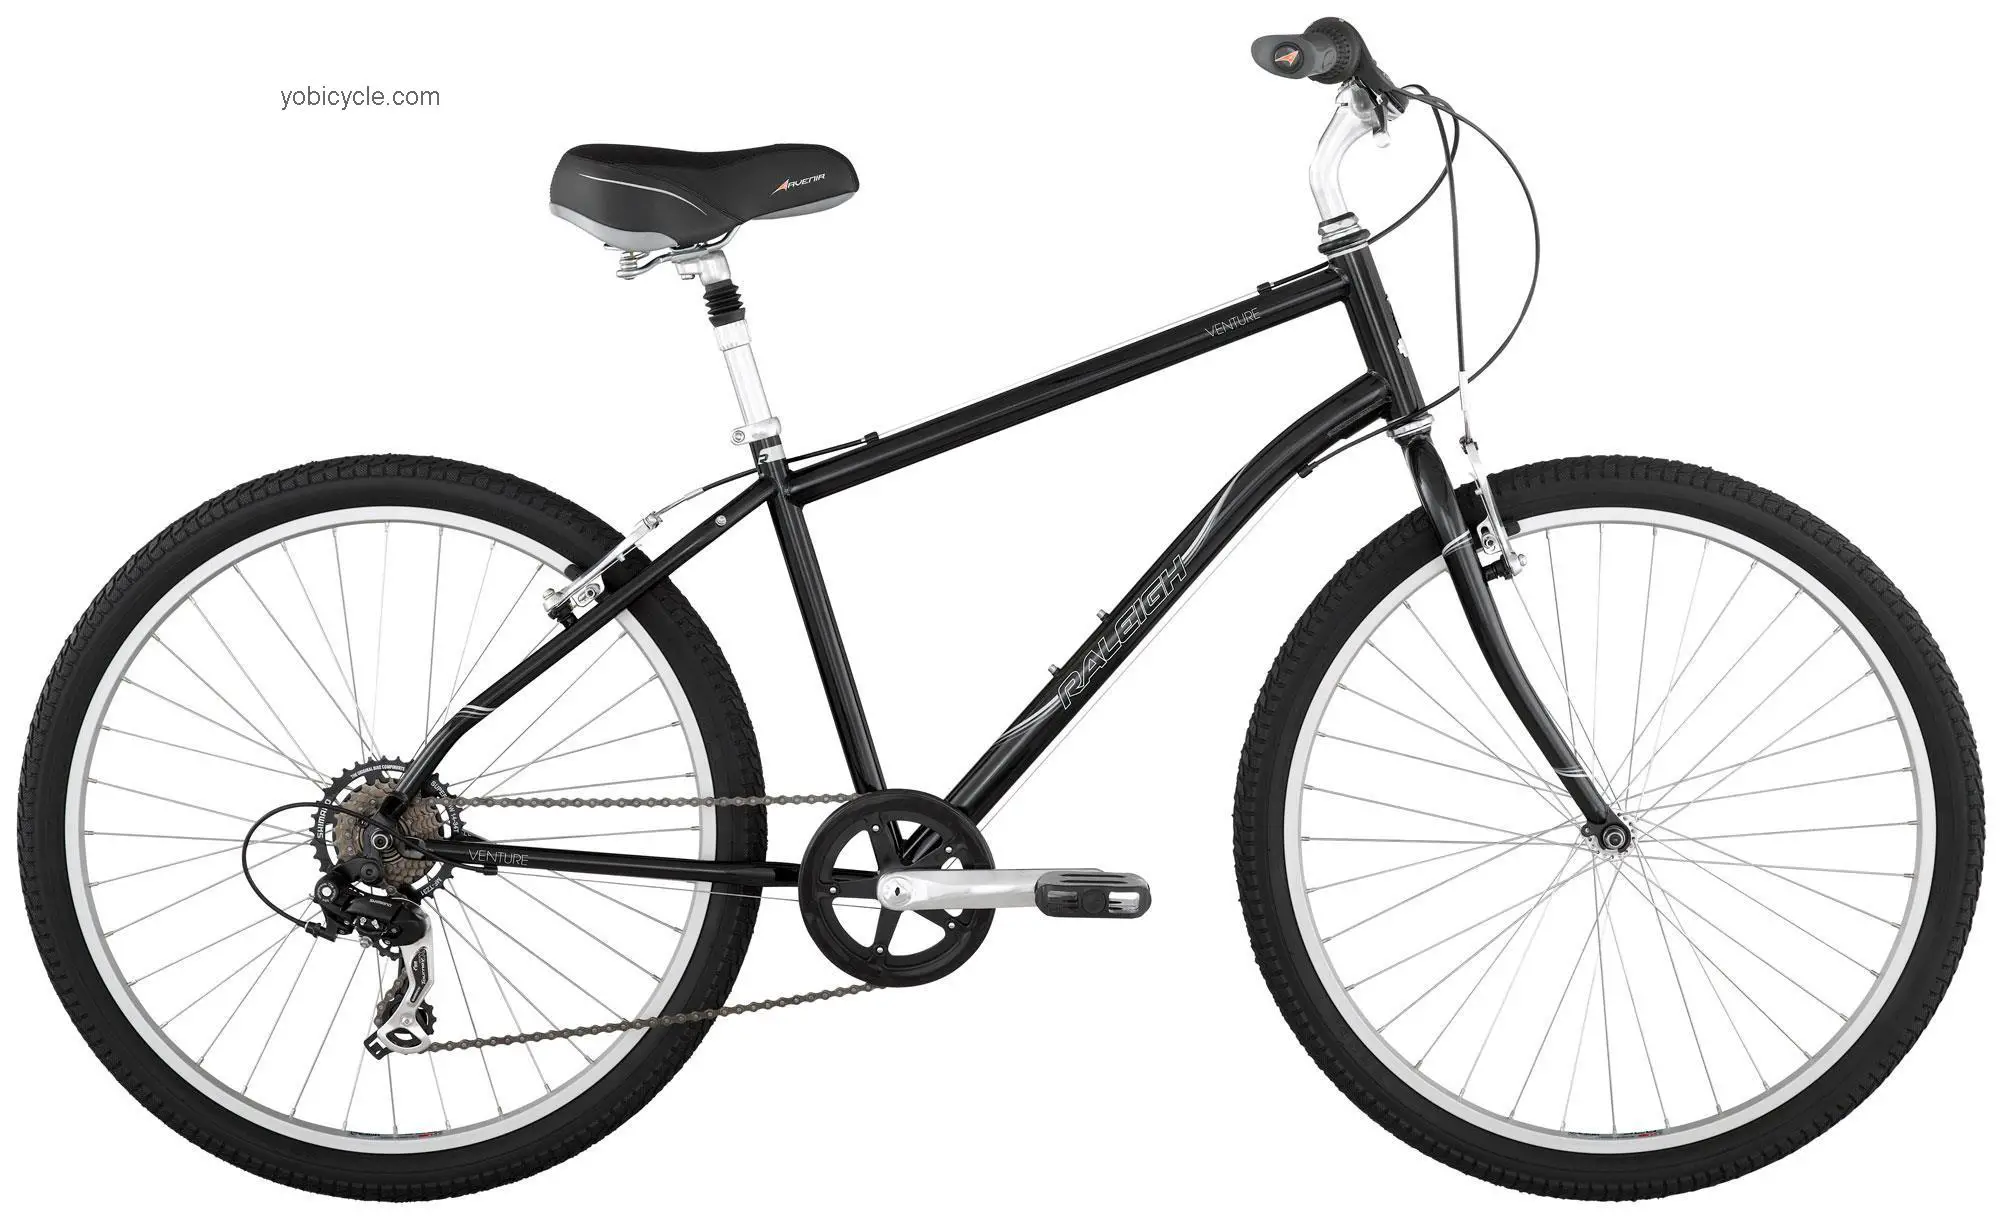 Raleigh Venture competitors and comparison tool online specs and performance